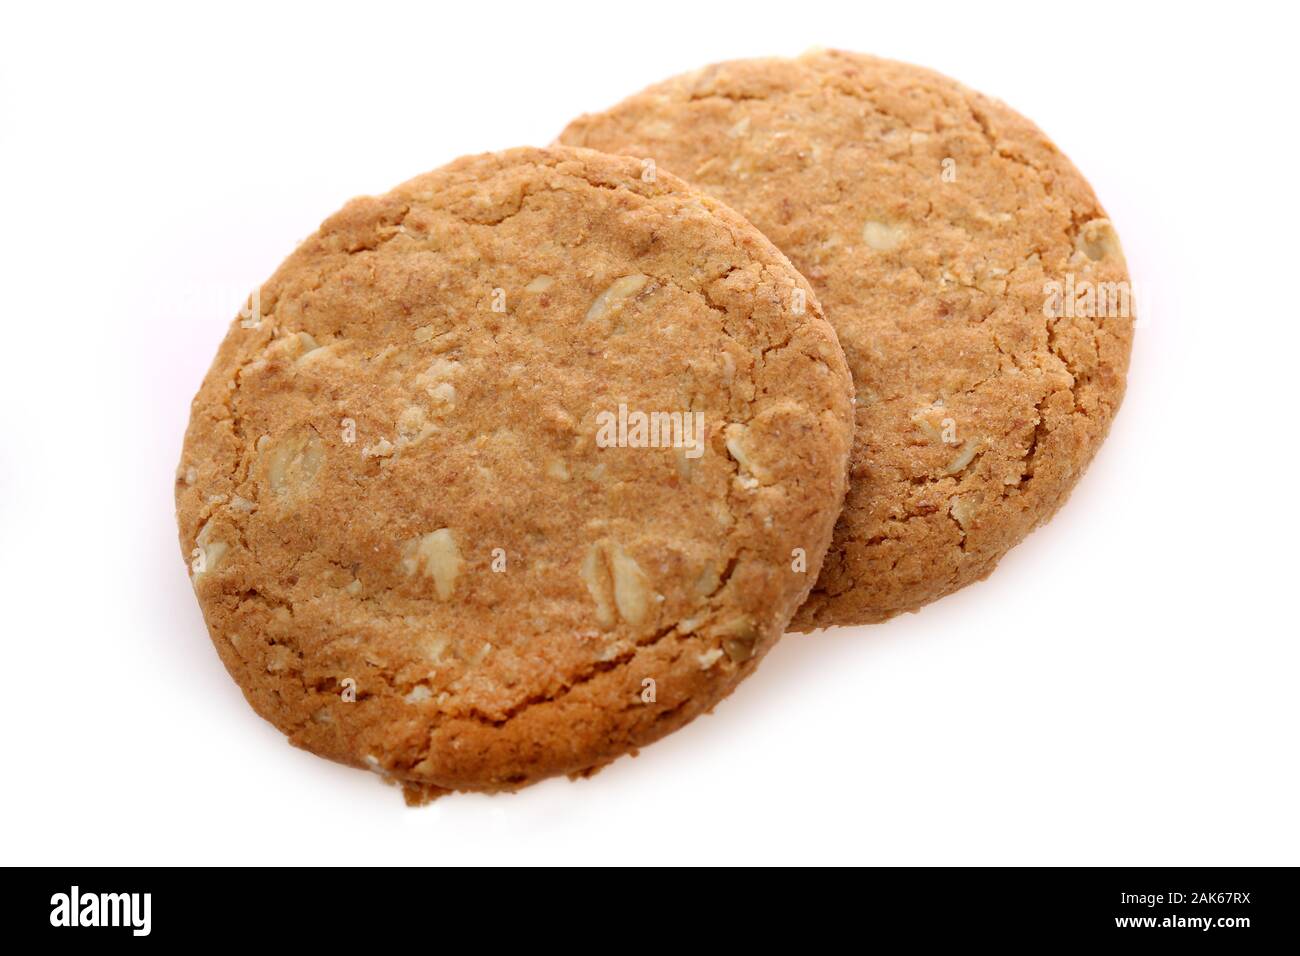 McVitie’s Crunchy Oat biscuits on a white background Stock Photo